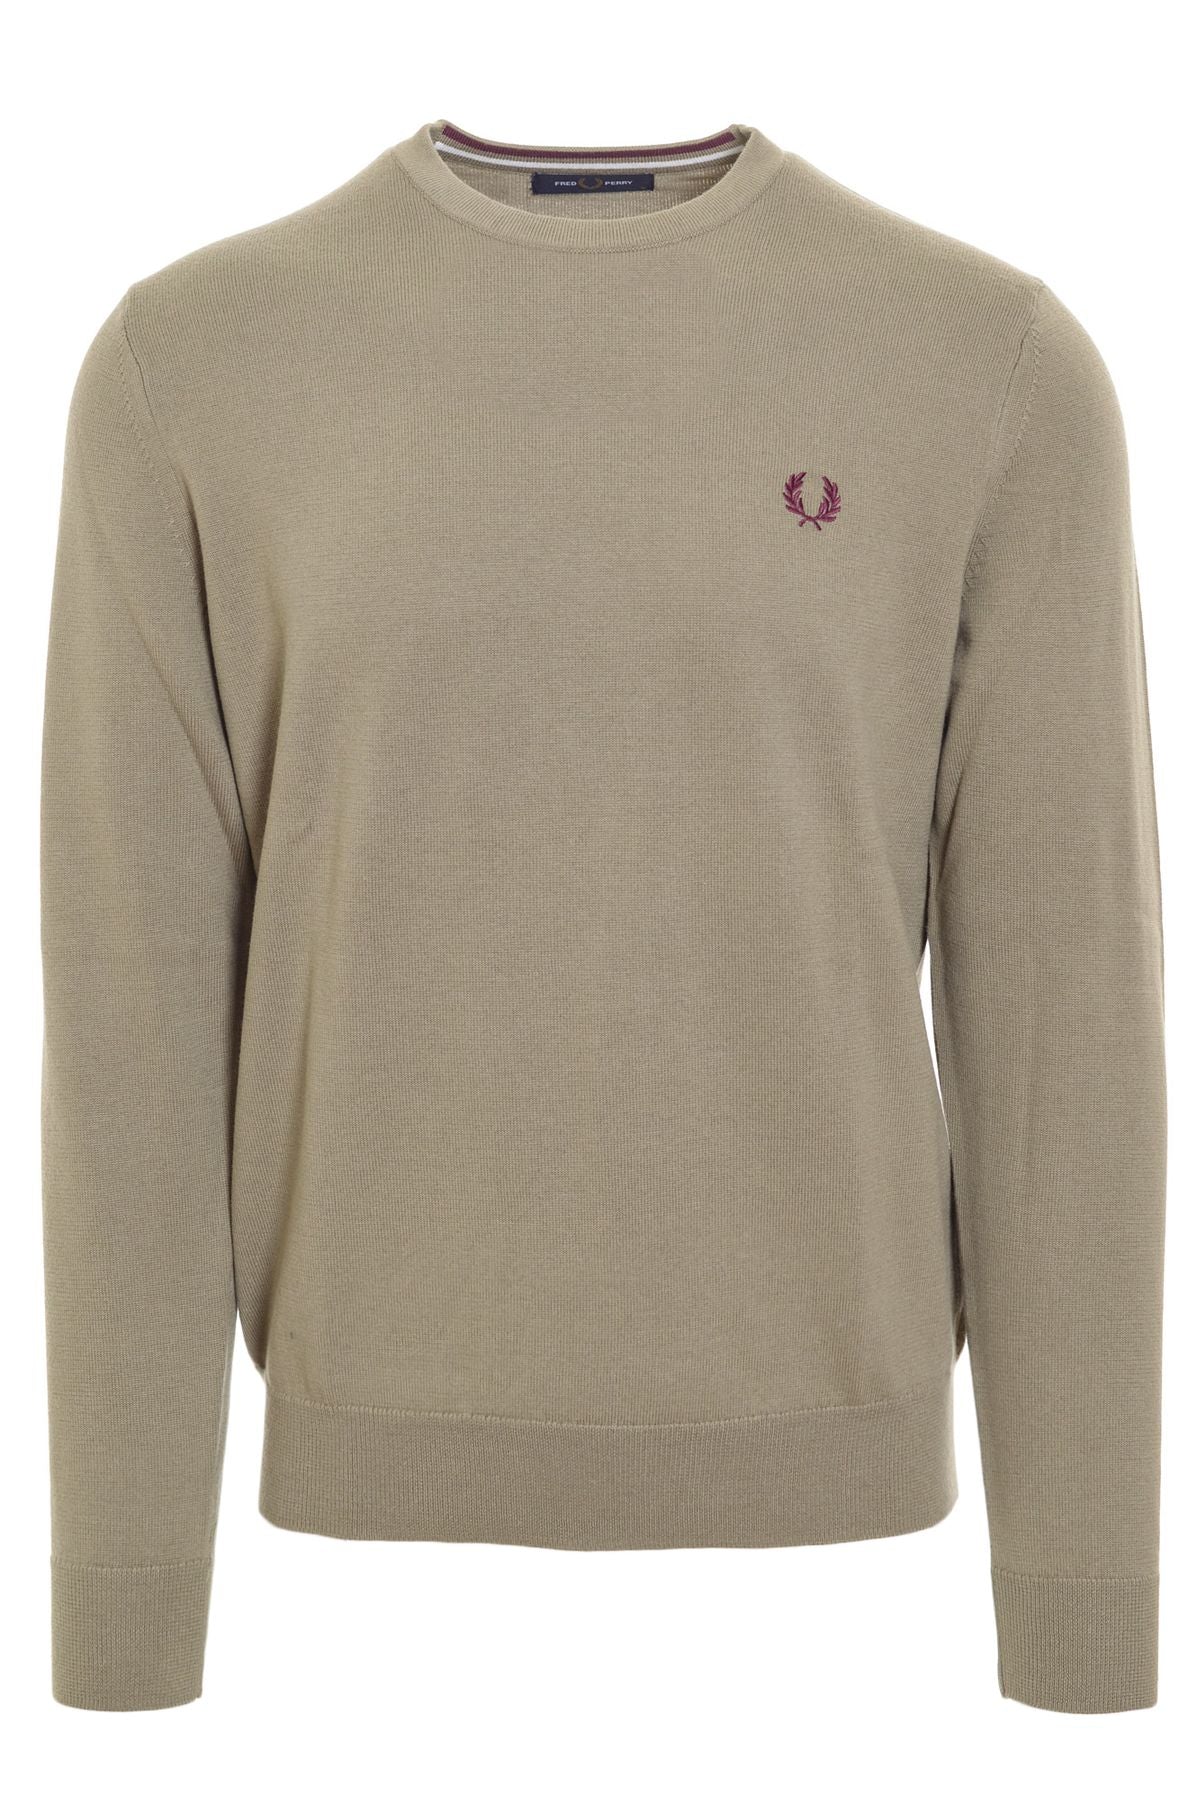 FRED PERRY Maglie Autunno/Inverno k9601